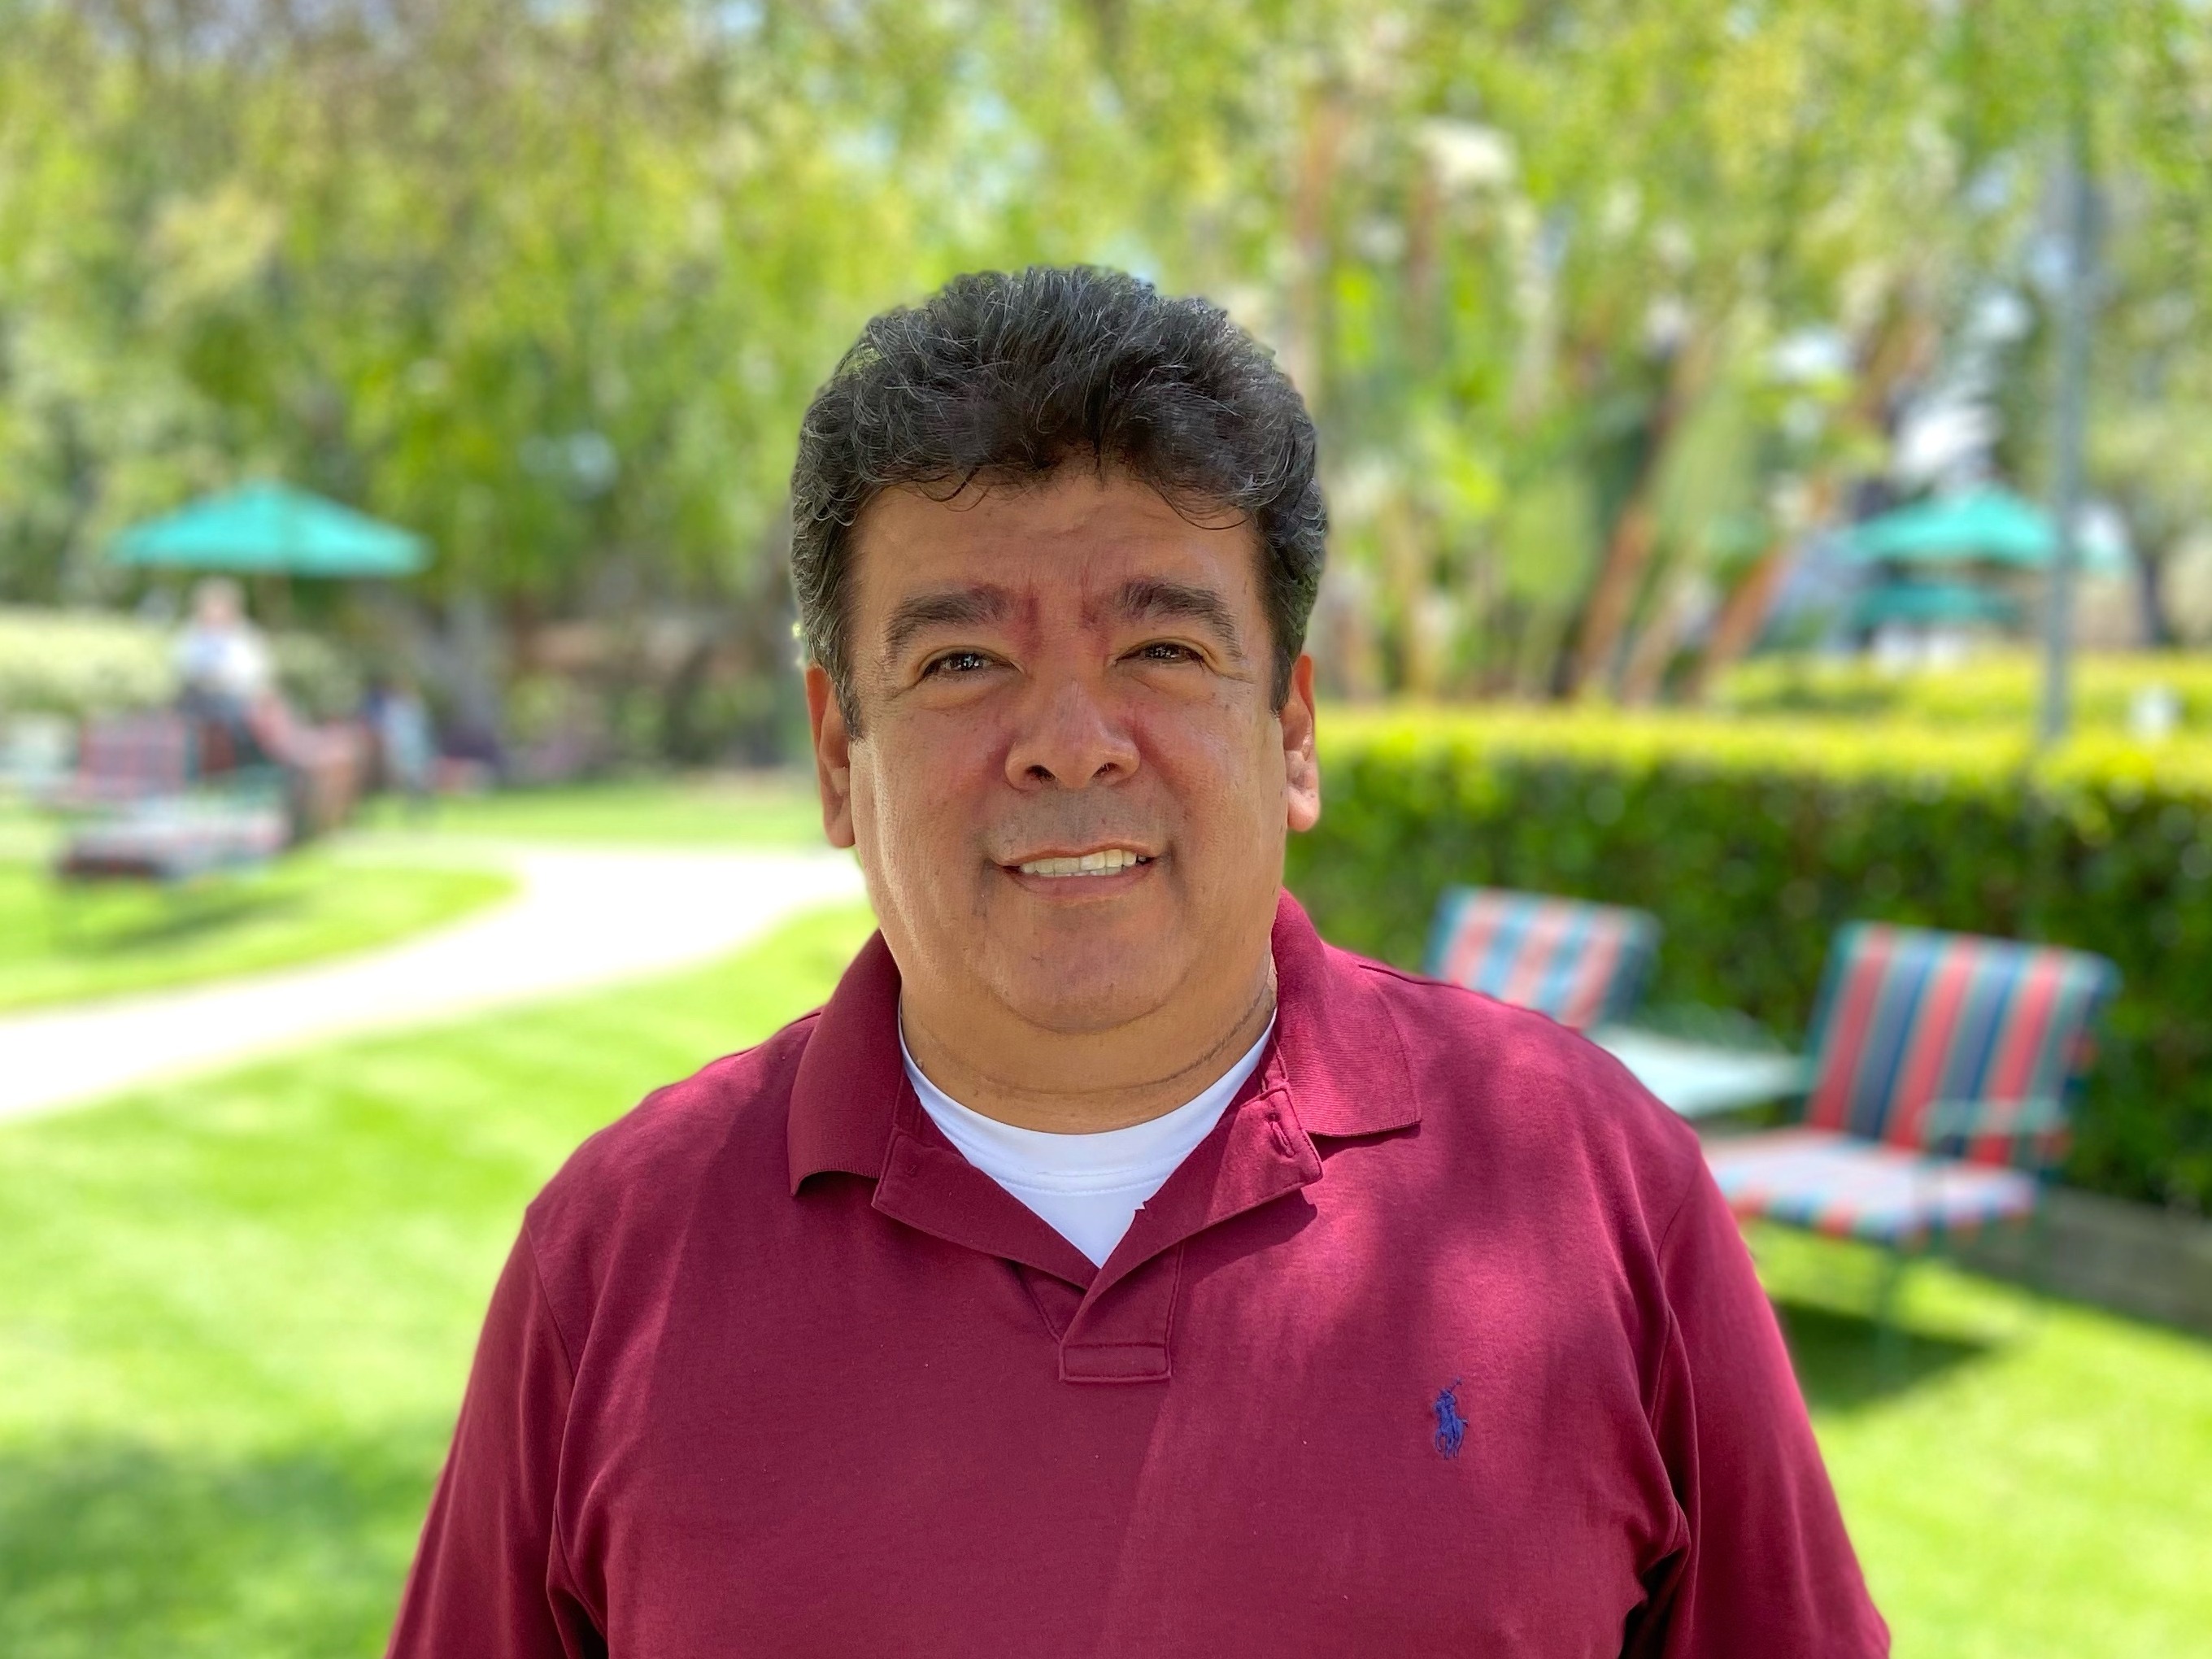 OHI’s director of guest services, Guillermo Romero, focuses on creating holistic retreats for you.